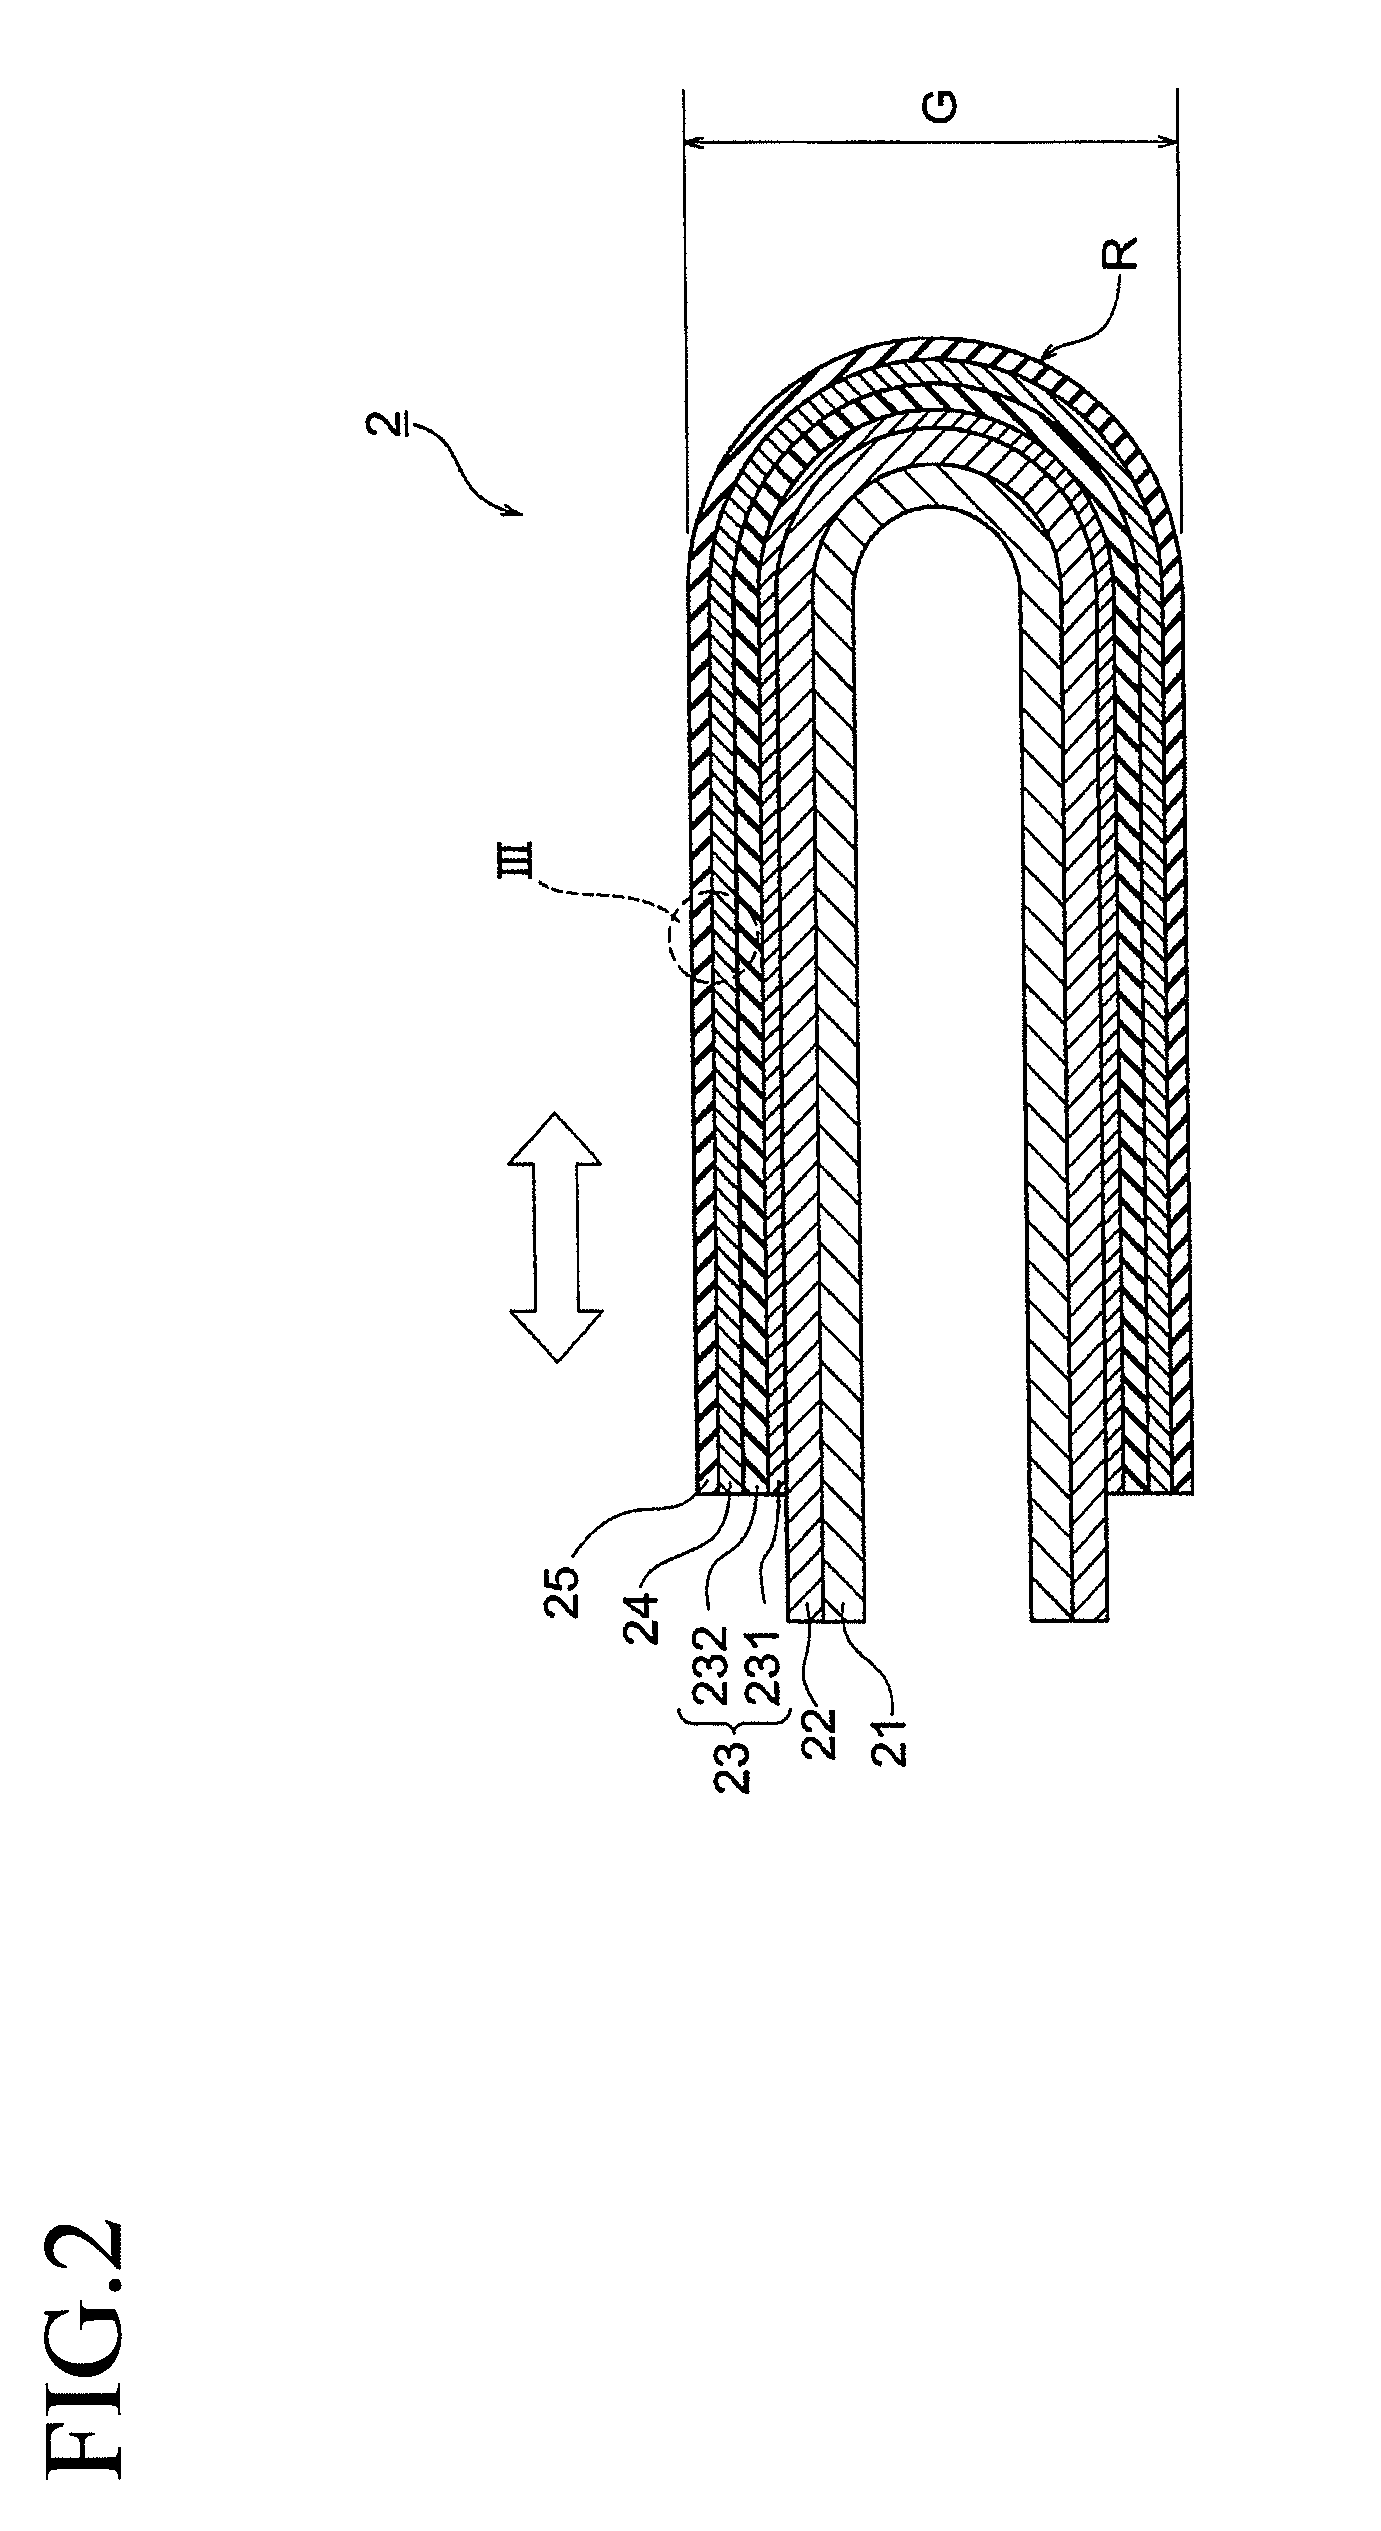 Flexible printed board and method of manufacturing same